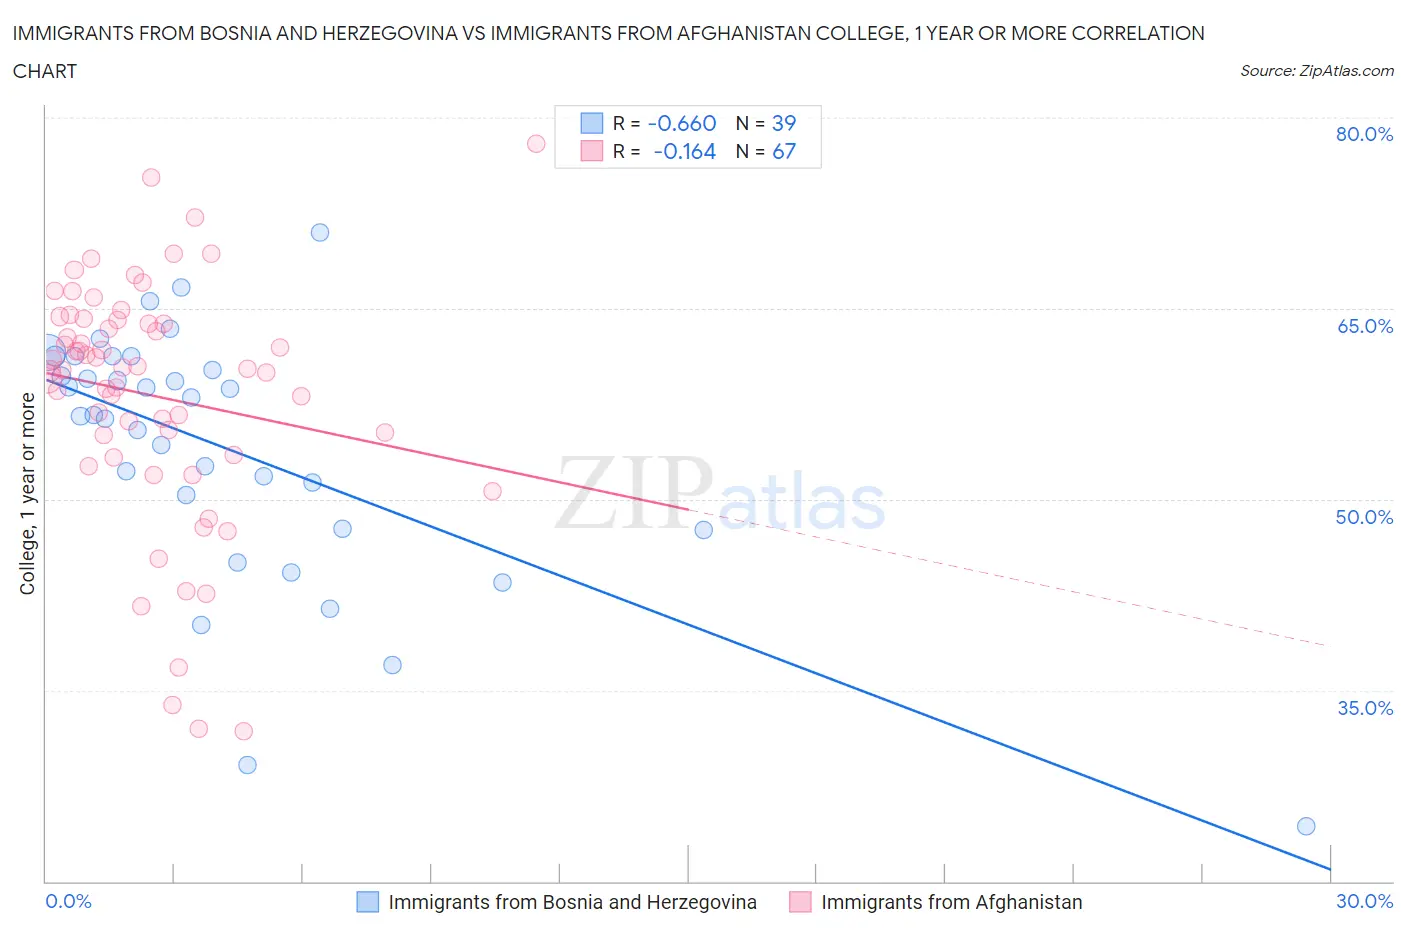 Immigrants from Bosnia and Herzegovina vs Immigrants from Afghanistan College, 1 year or more